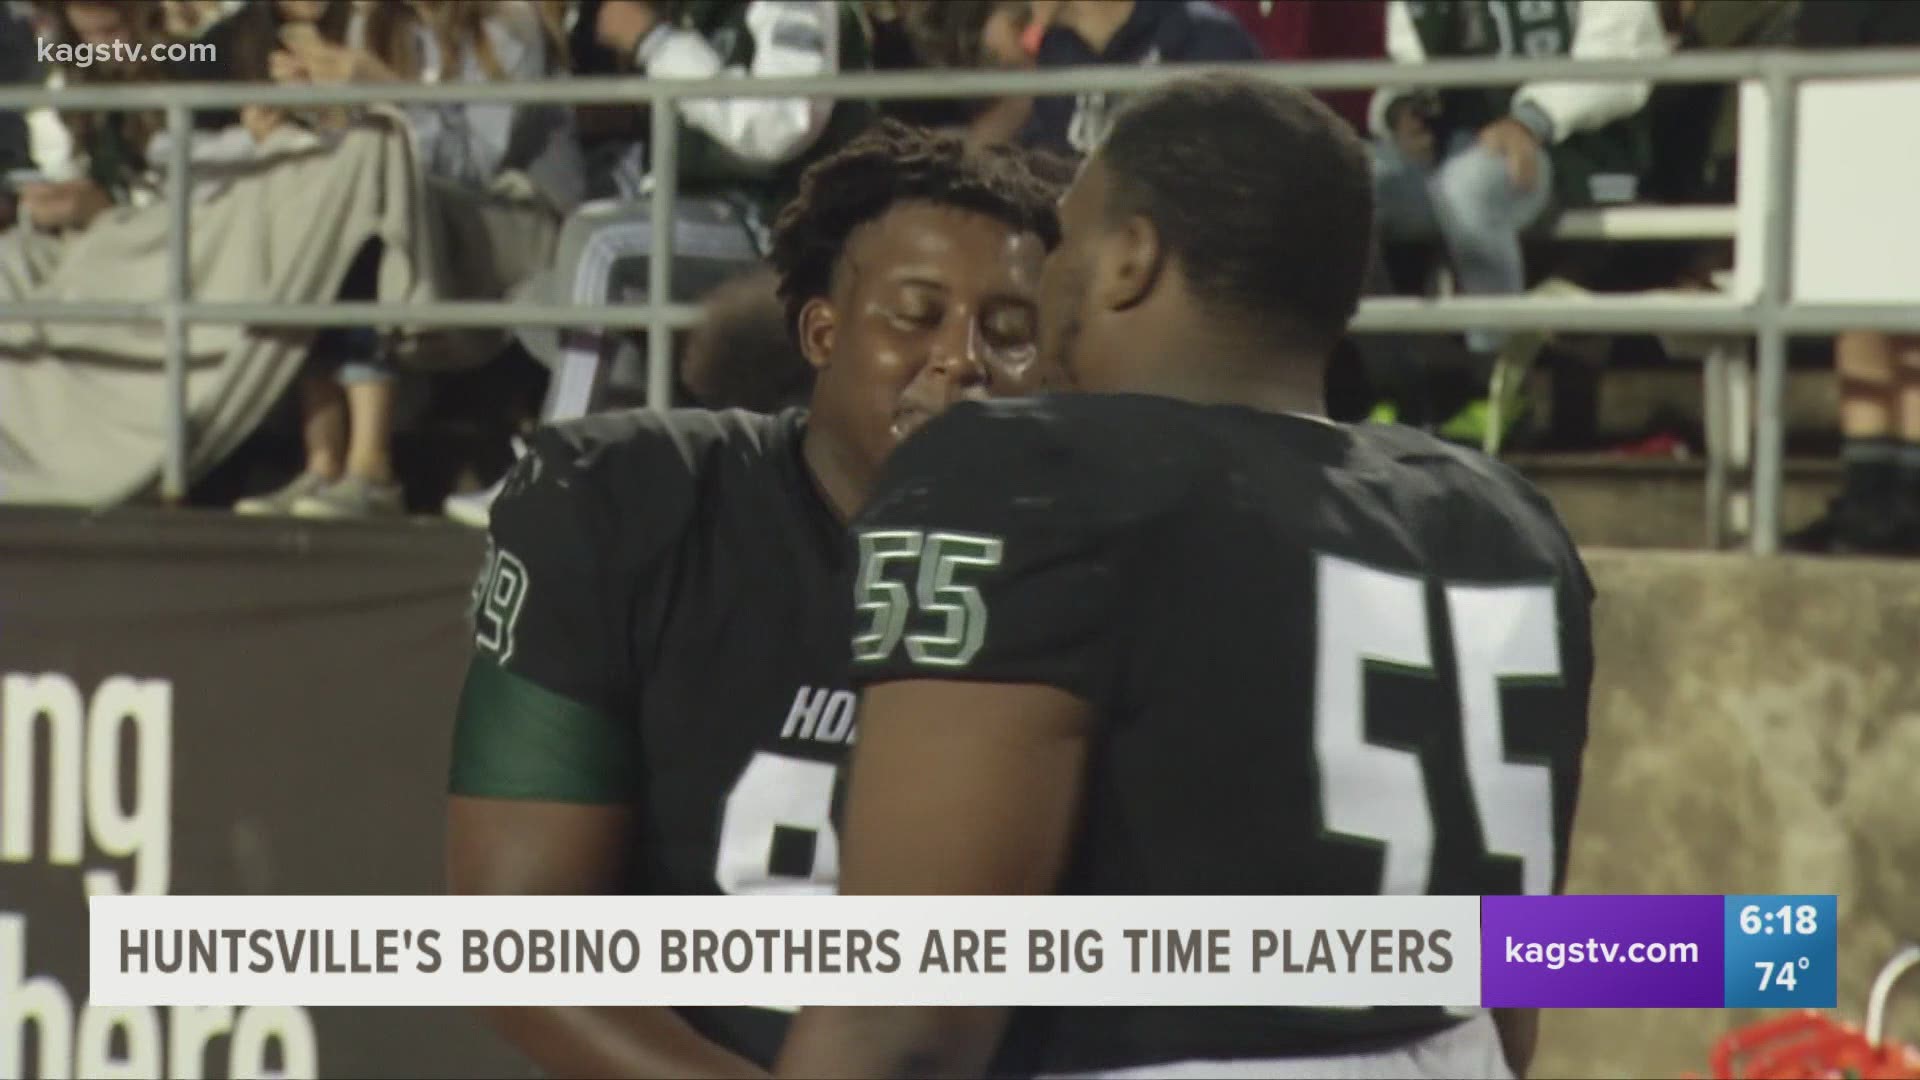 The Bobino brothers have combined for 24.5 sacks this season